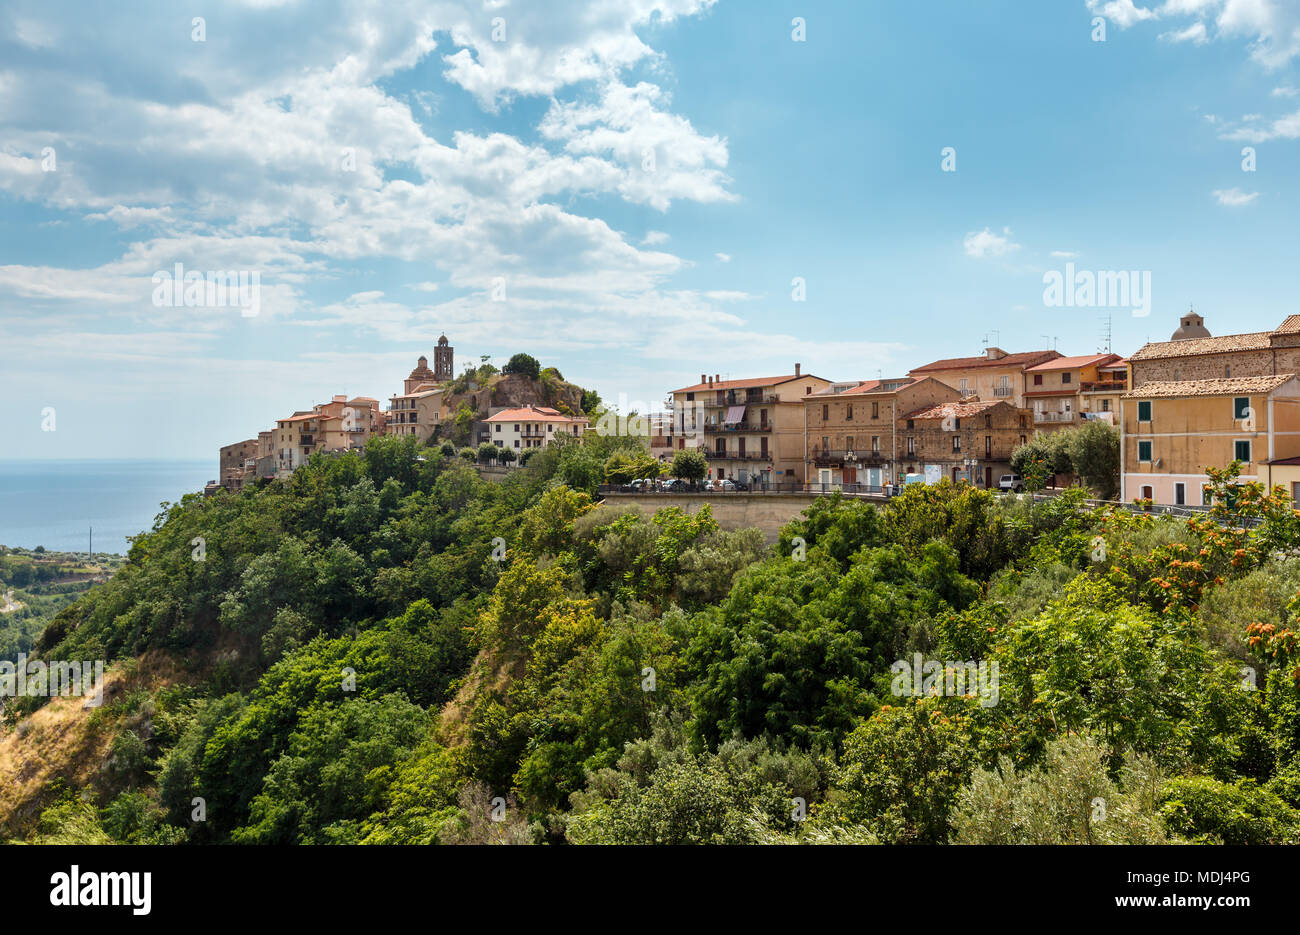 Old Belmonte Calabro town on mountain hill top, province of Cosenza ...